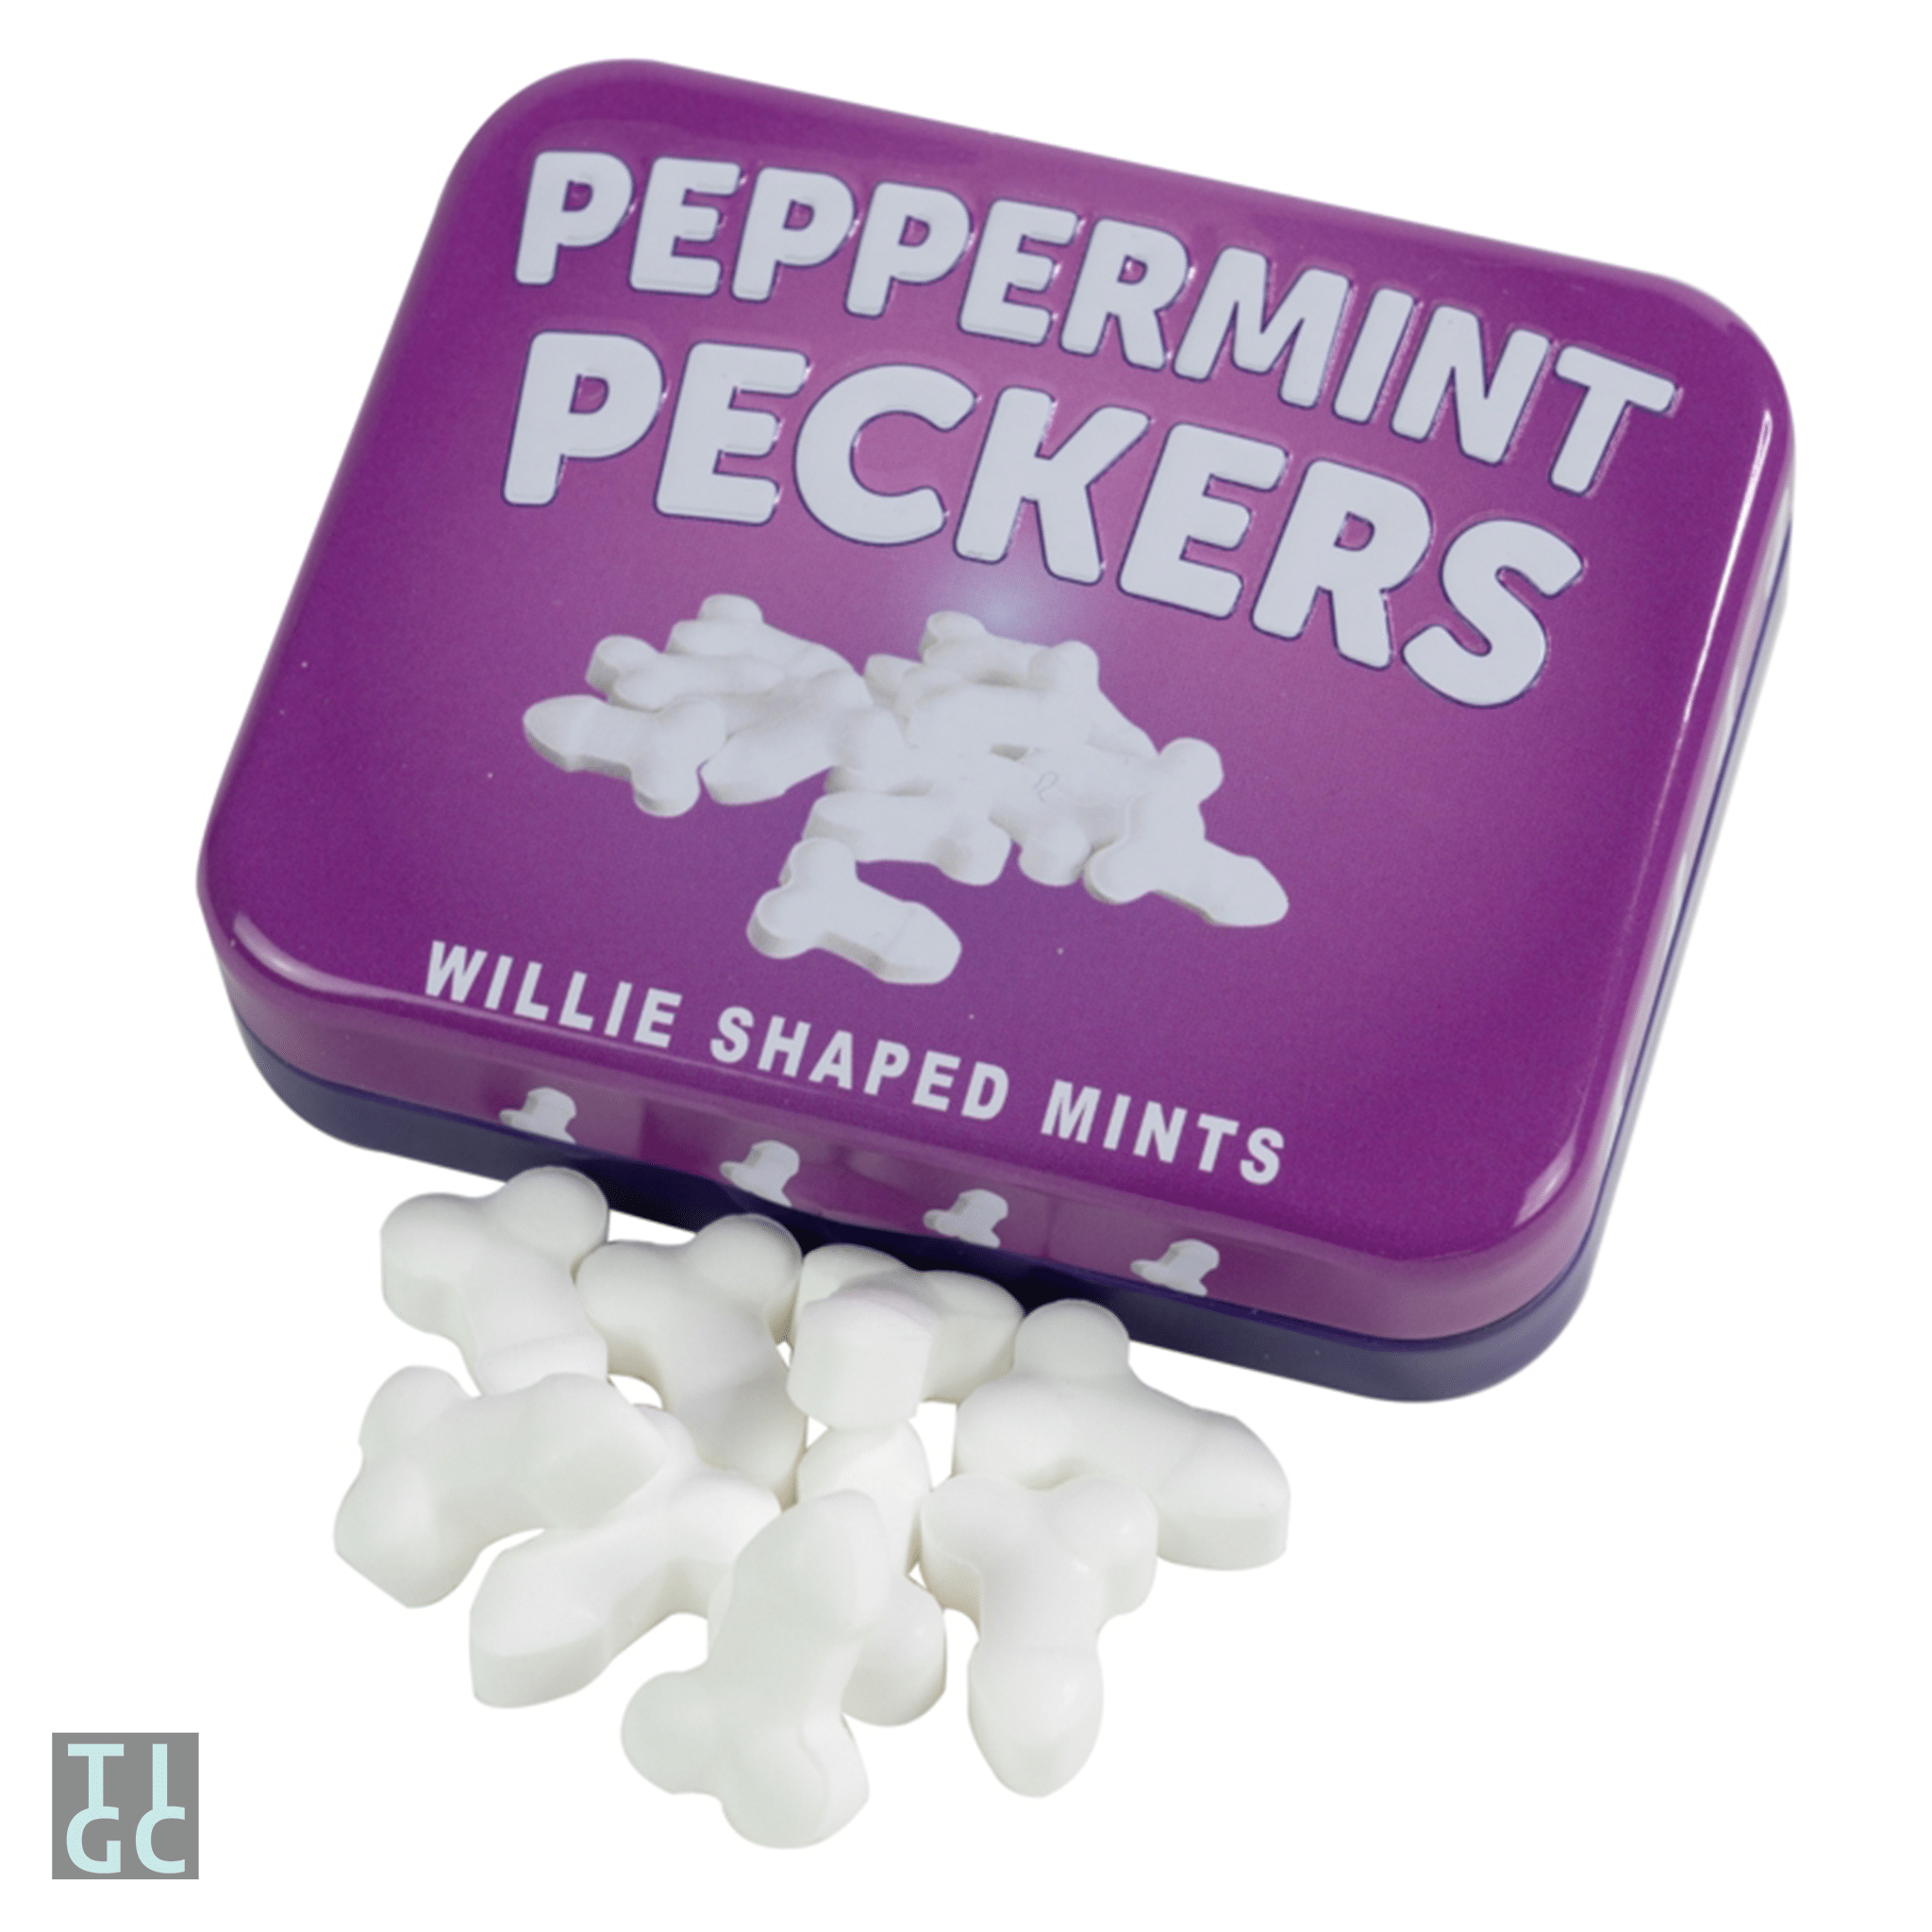 Peckermints - willy shaped mints - The Inappropriate Gift Co